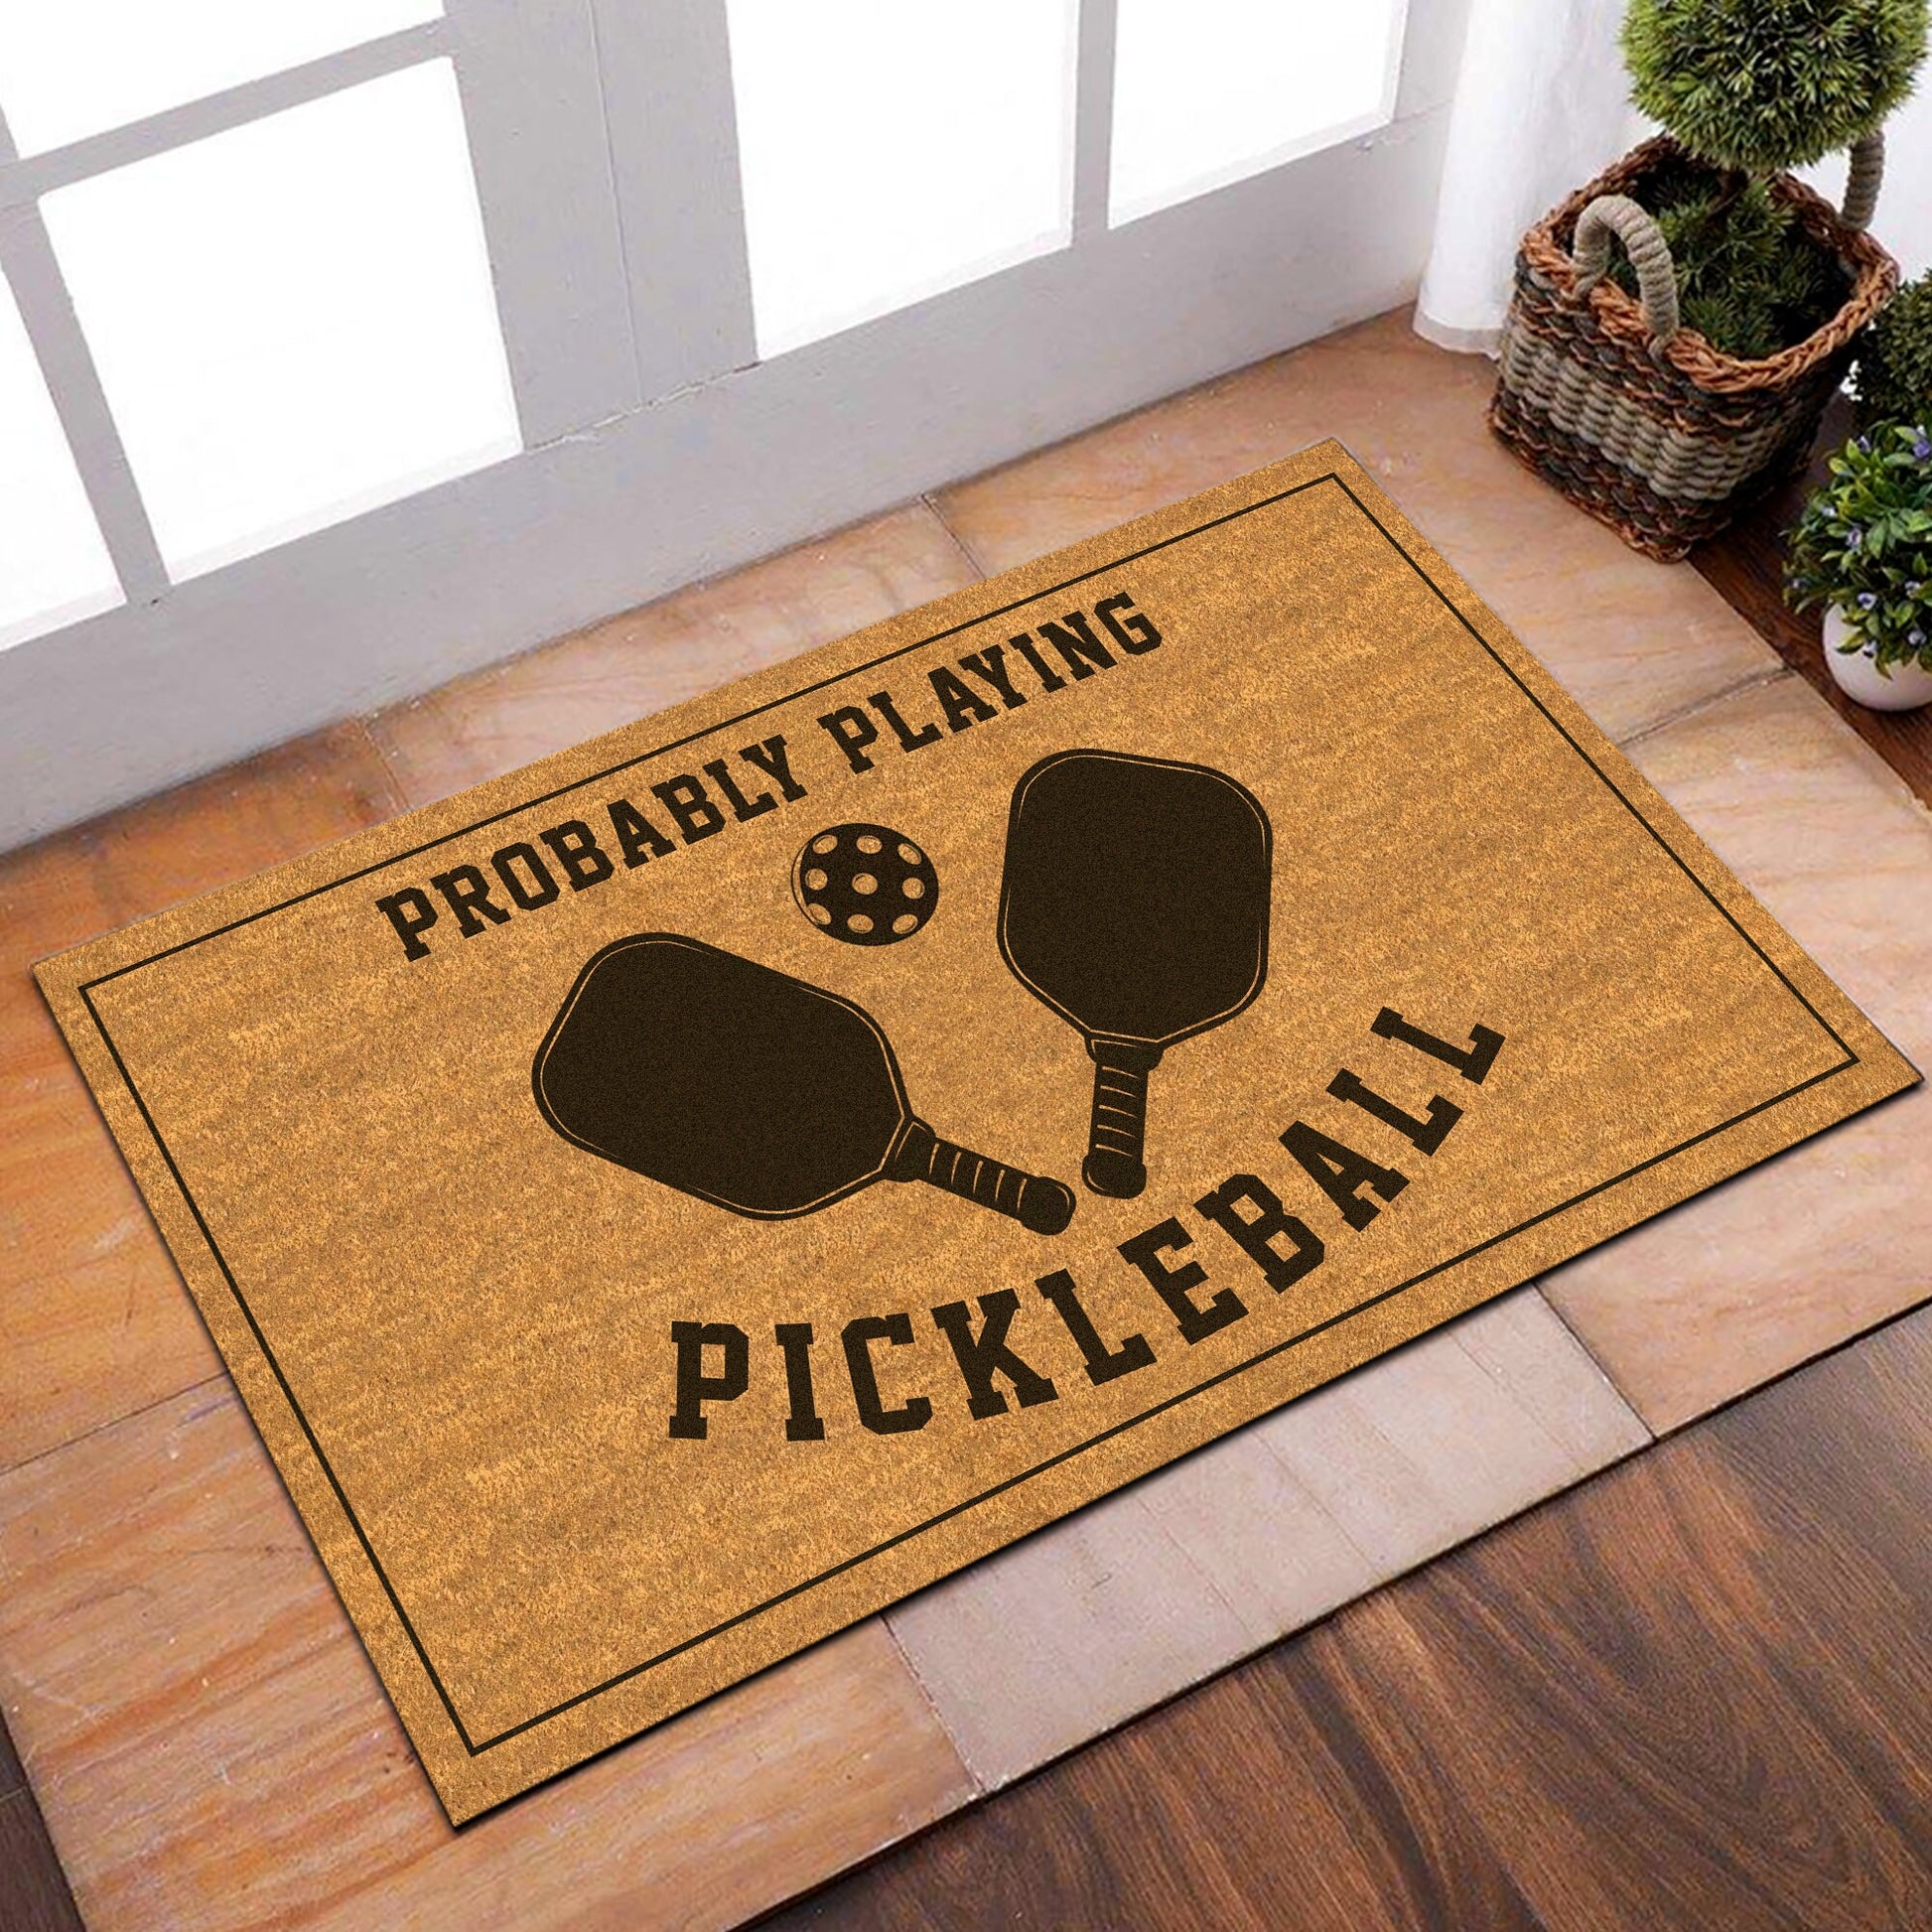 Pickleball Doormat, Probably Playing Pickleball Doormat, Pickleball Gifts, Pickleball Door Mat, Pickleball Mat, Gifts for Pickleball Player